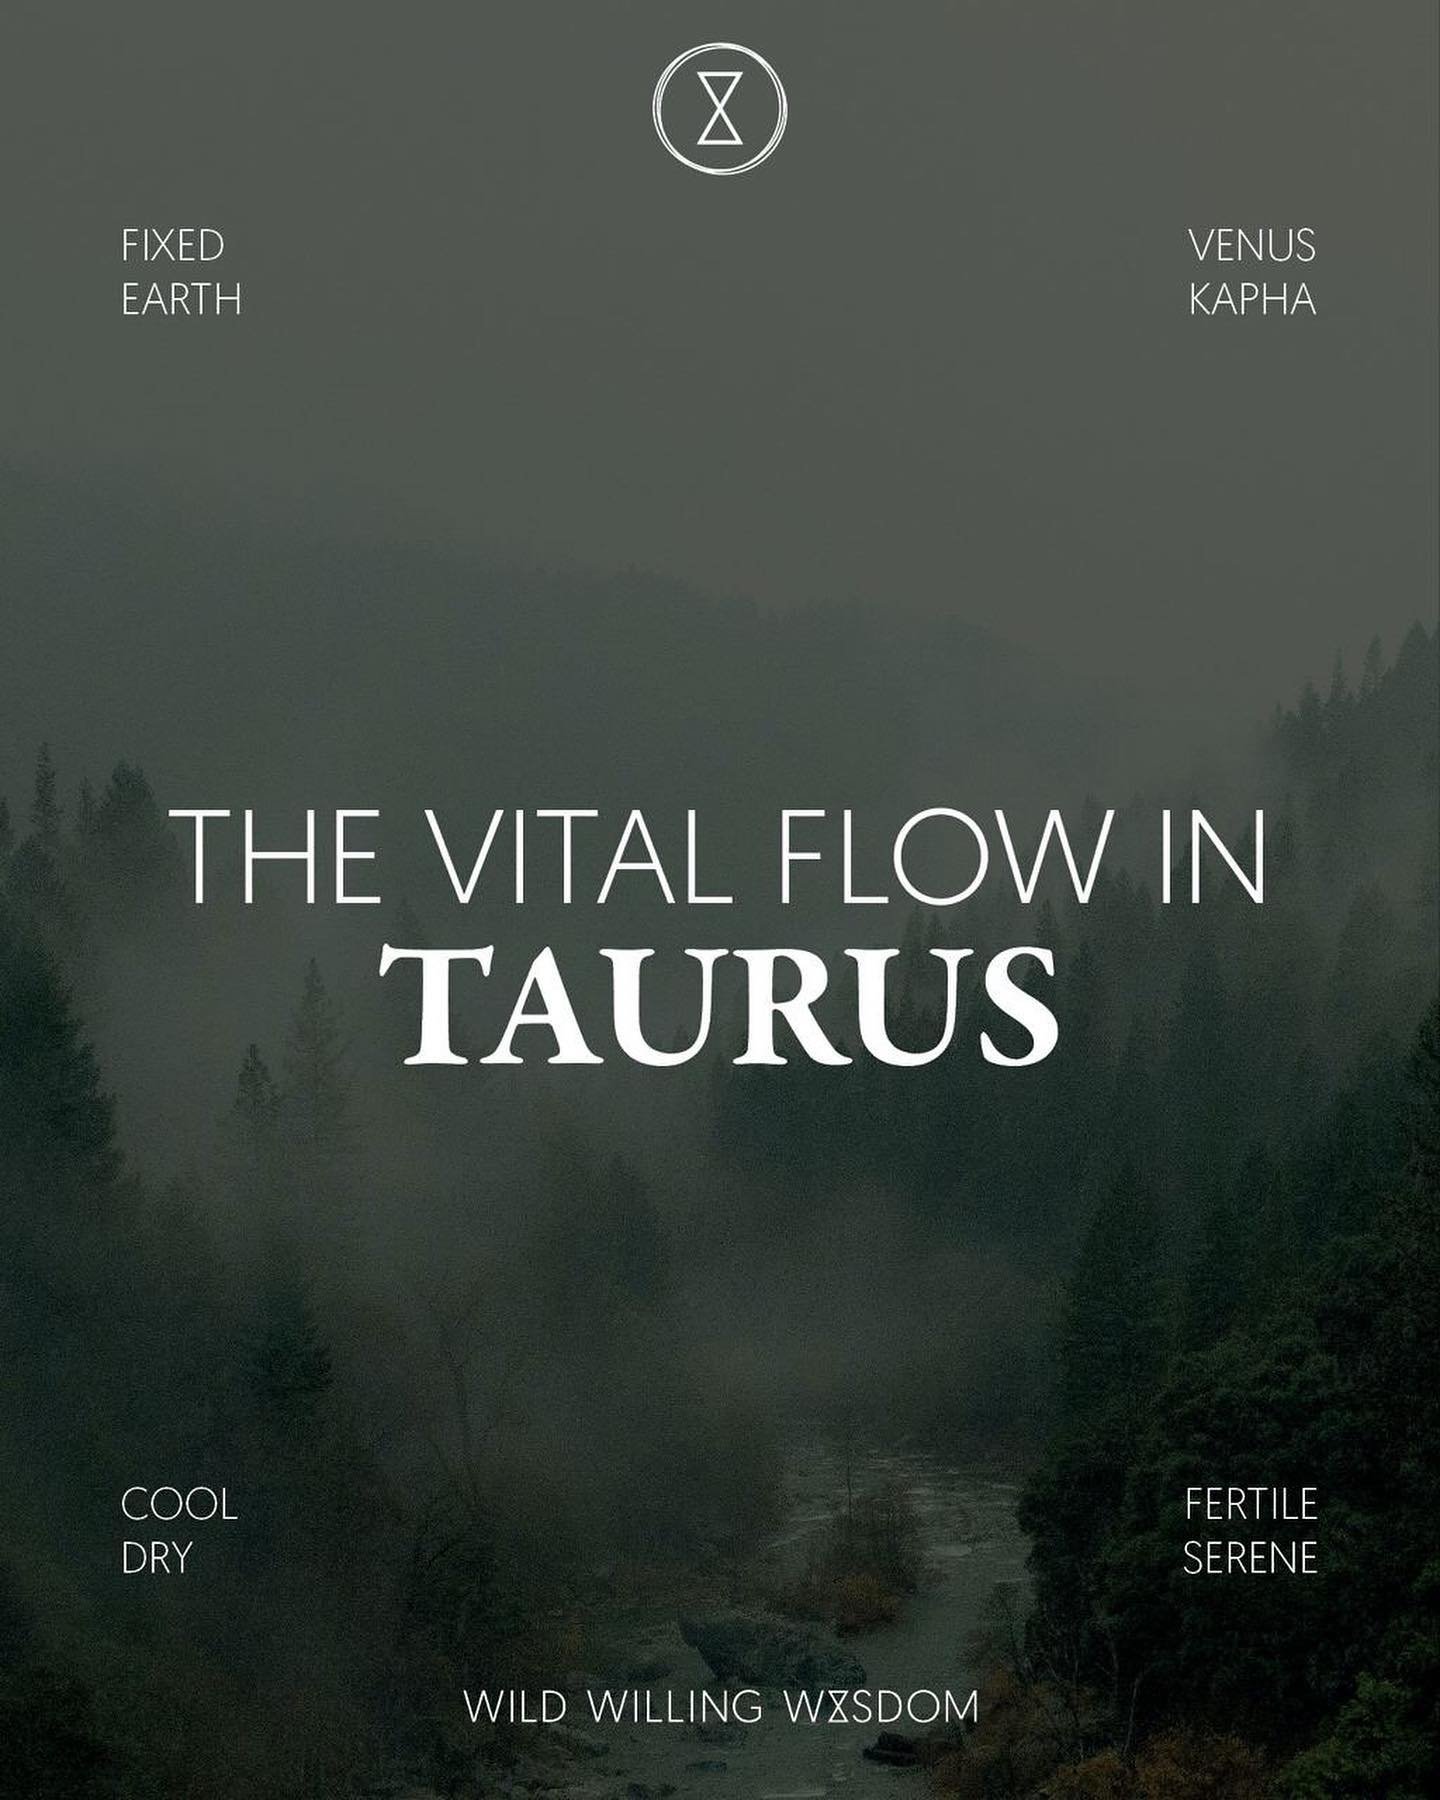 Yesterday we learned about the essence of Taurus&rsquo; Vital Force, but how does it 𝙛𝙡𝙤𝙬?

The Moon&rsquo;s placement shows us how your Chi will be distributed.

What is the 𝙦𝙪𝙖𝙡𝙞𝙩𝙮 of that flow?
Where does it 𝙨𝙝𝙤𝙬 𝙪𝙥 in the body?
H